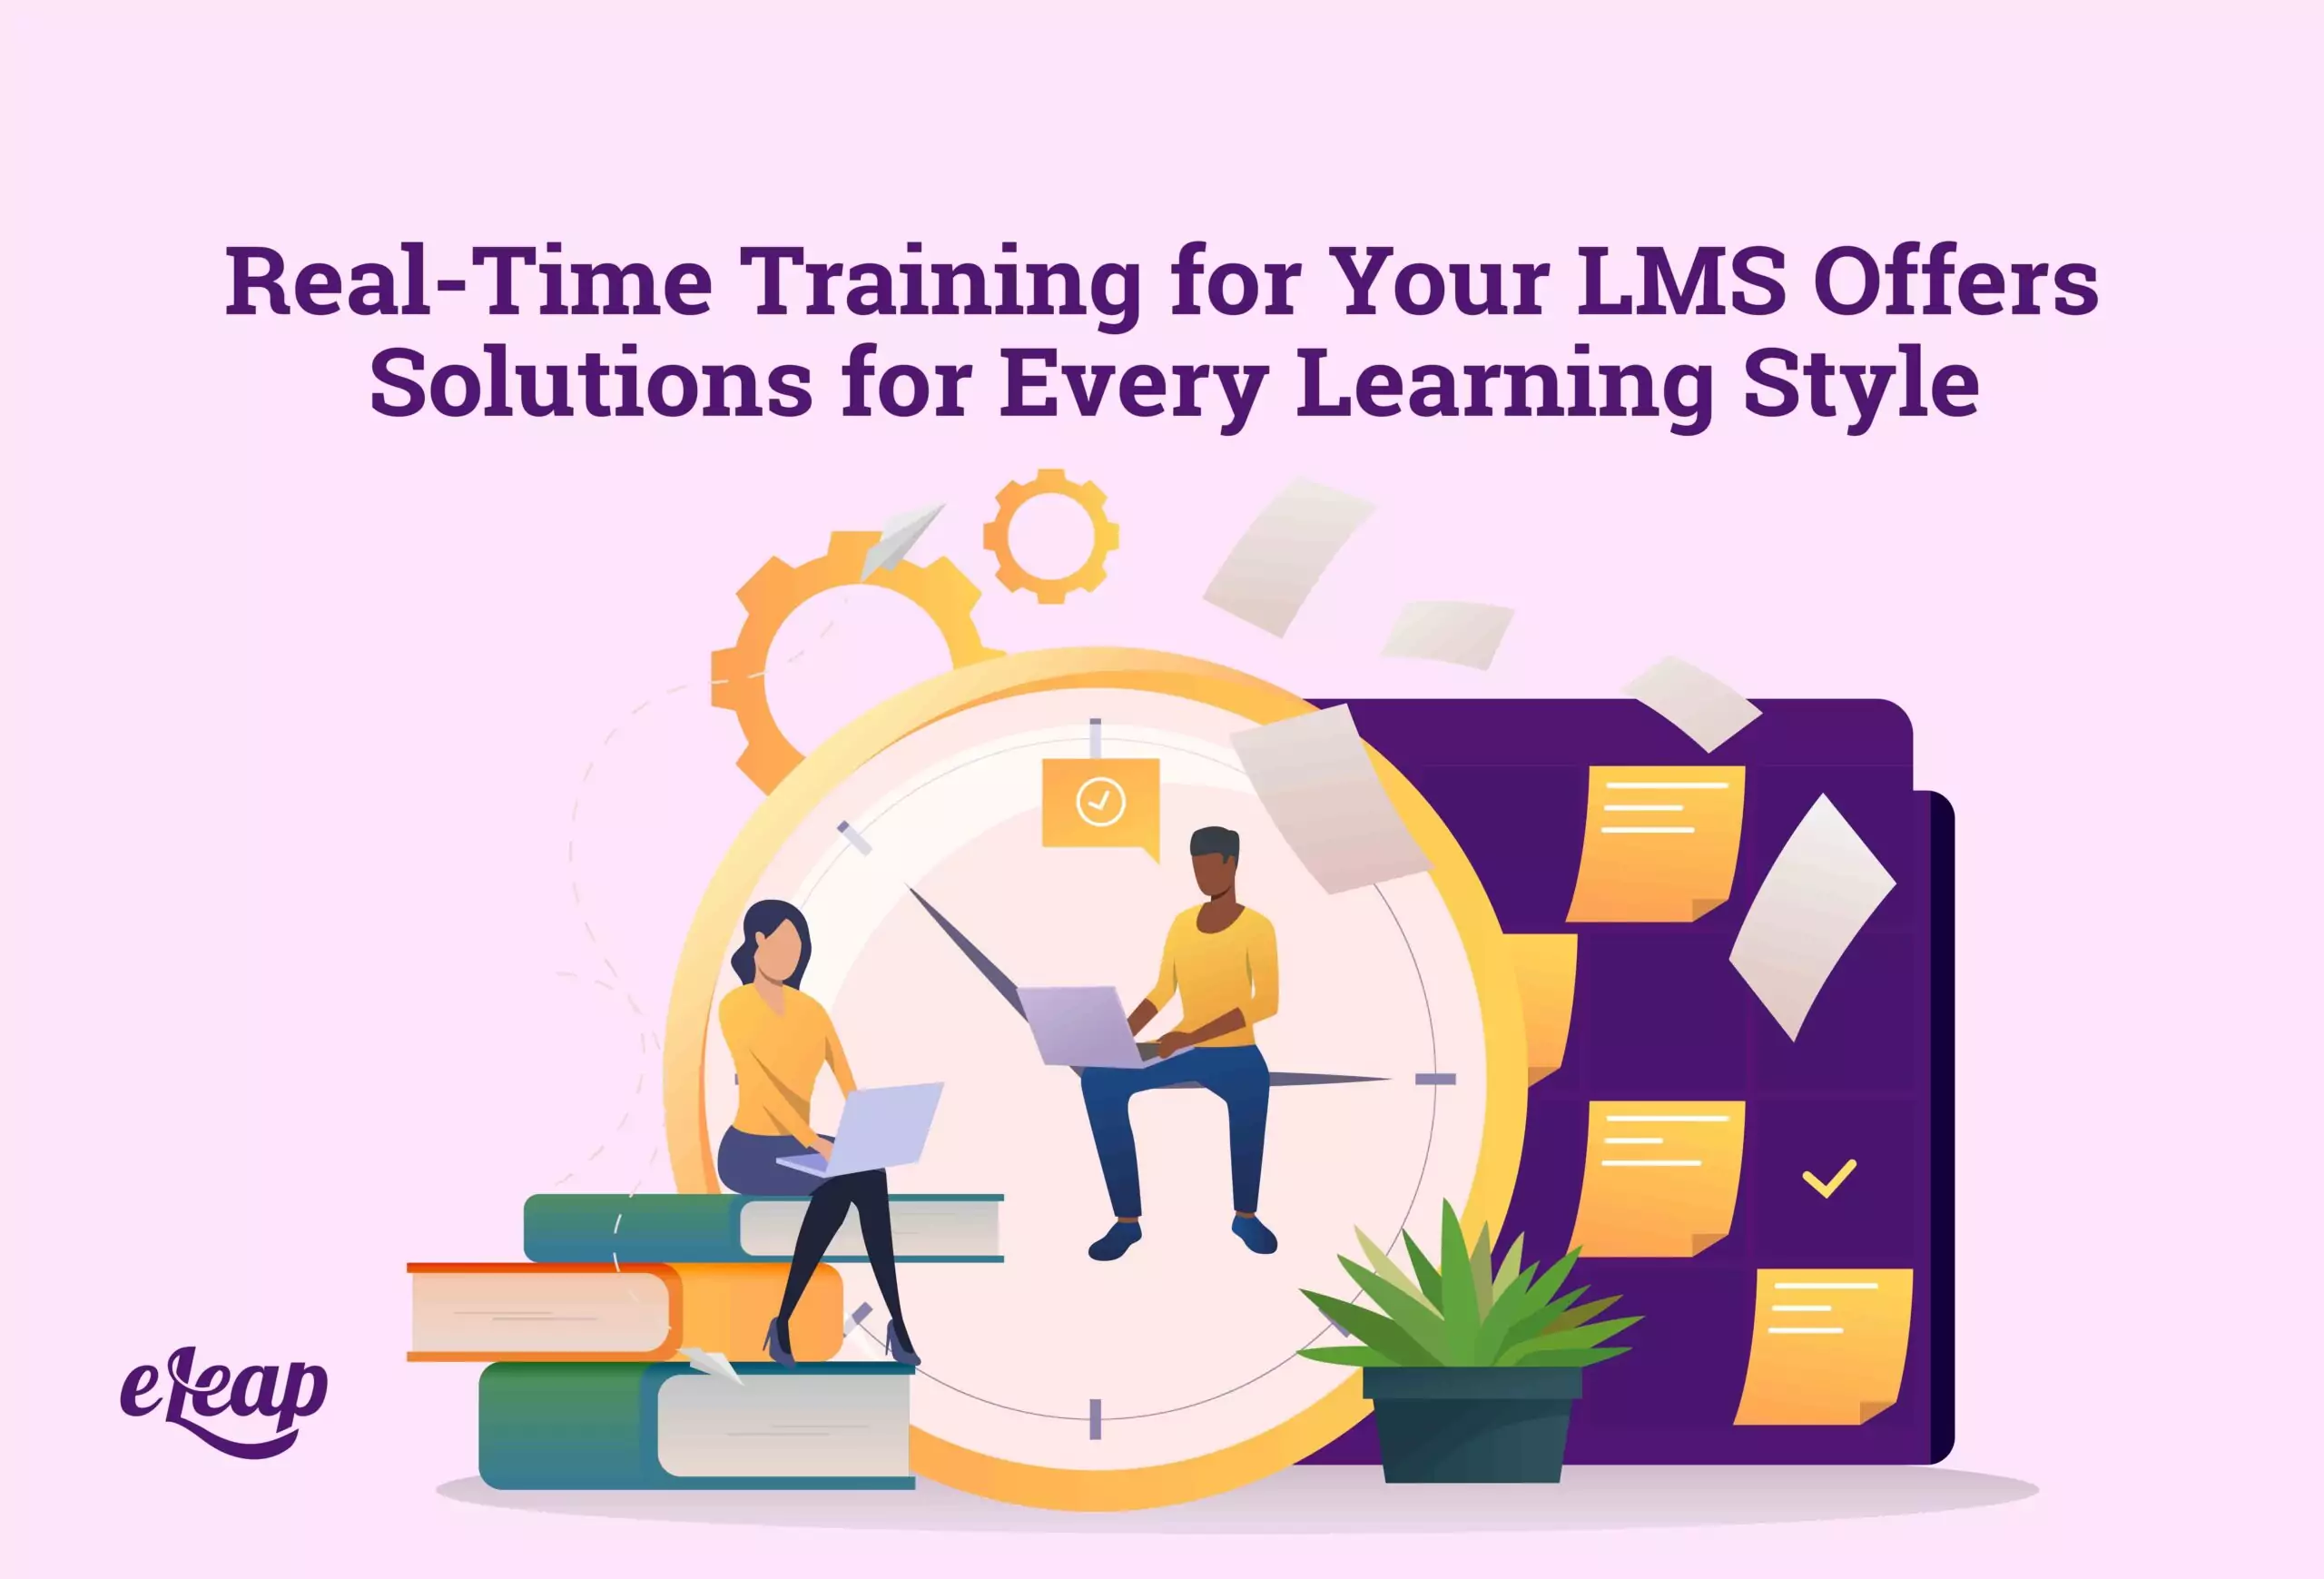 Real-Time Training for Your LMS Offers Solutions for Every Learning Style